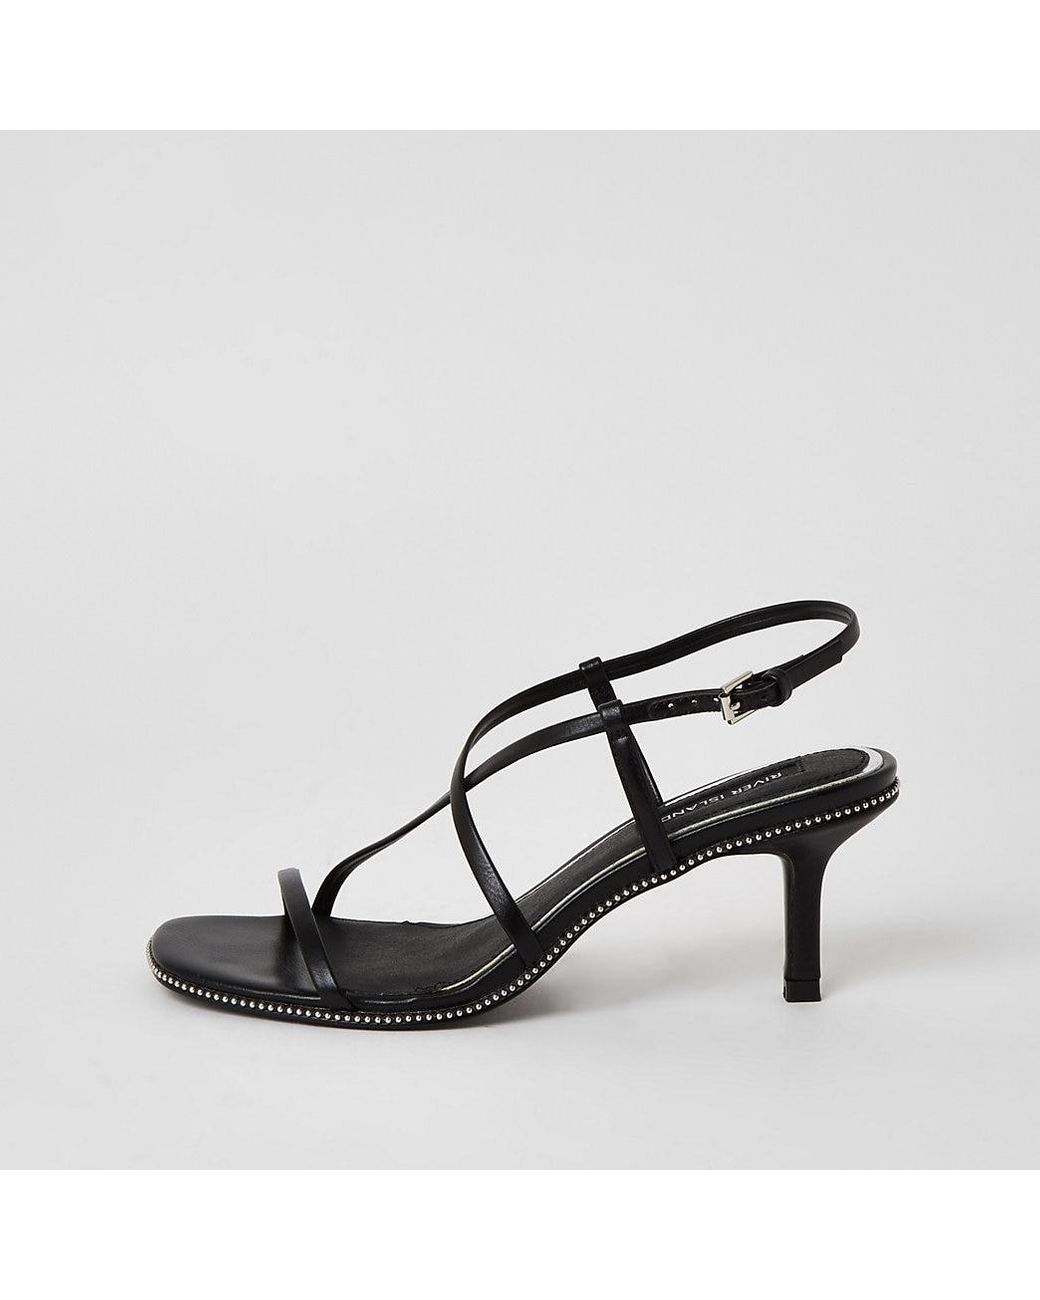 River Island Black Beaded Strappy Low Heel Sandals | Lyst